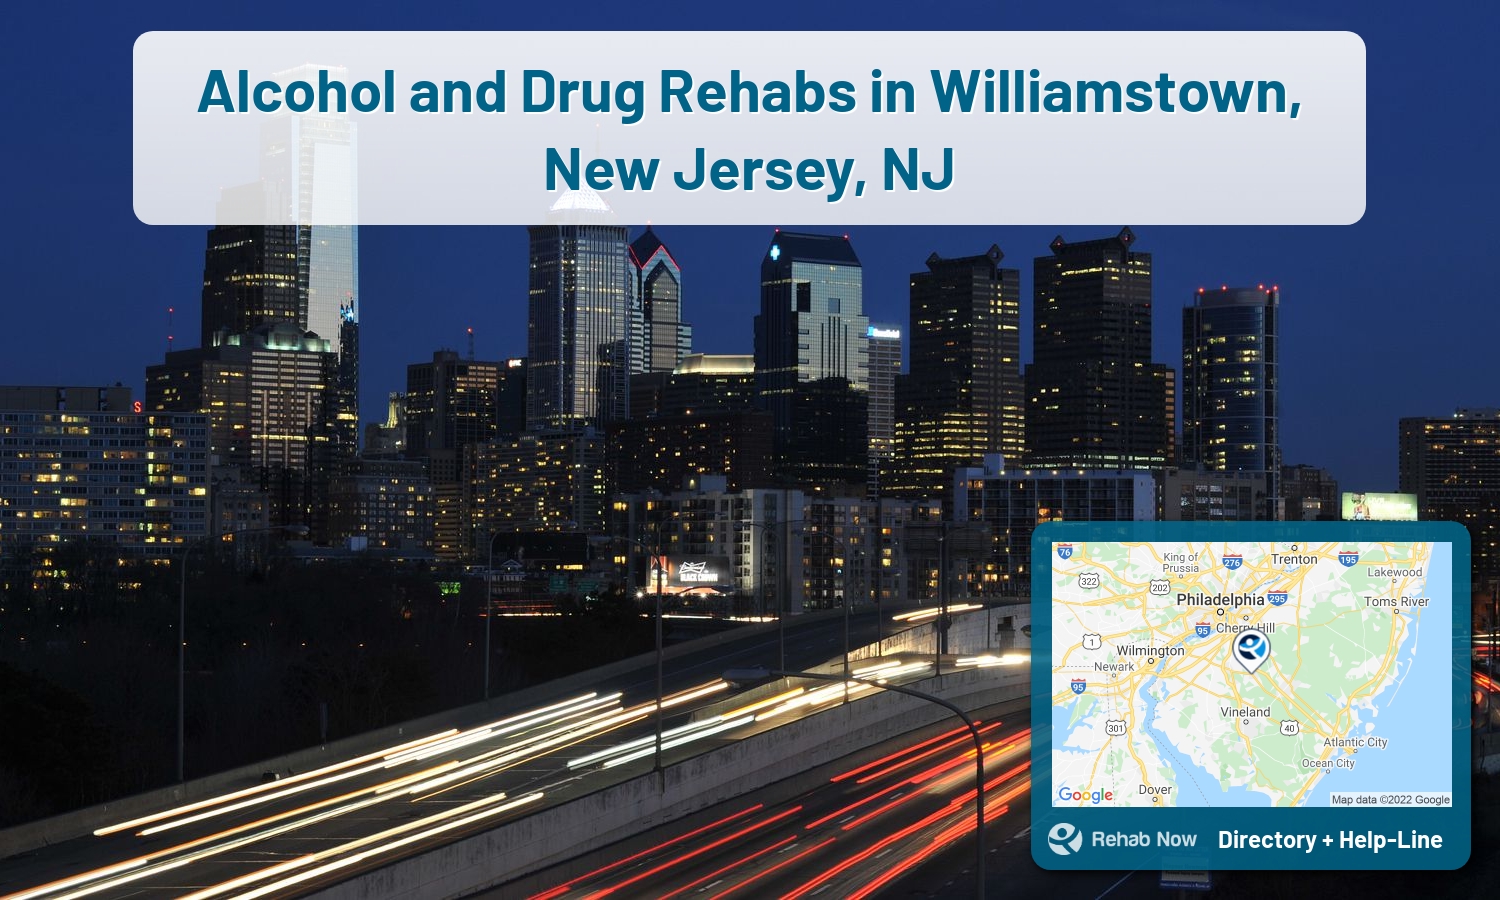 Williamstown, NJ Treatment Centers. Find drug rehab in Williamstown, New Jersey, or detox and treatment programs. Get the right help now!